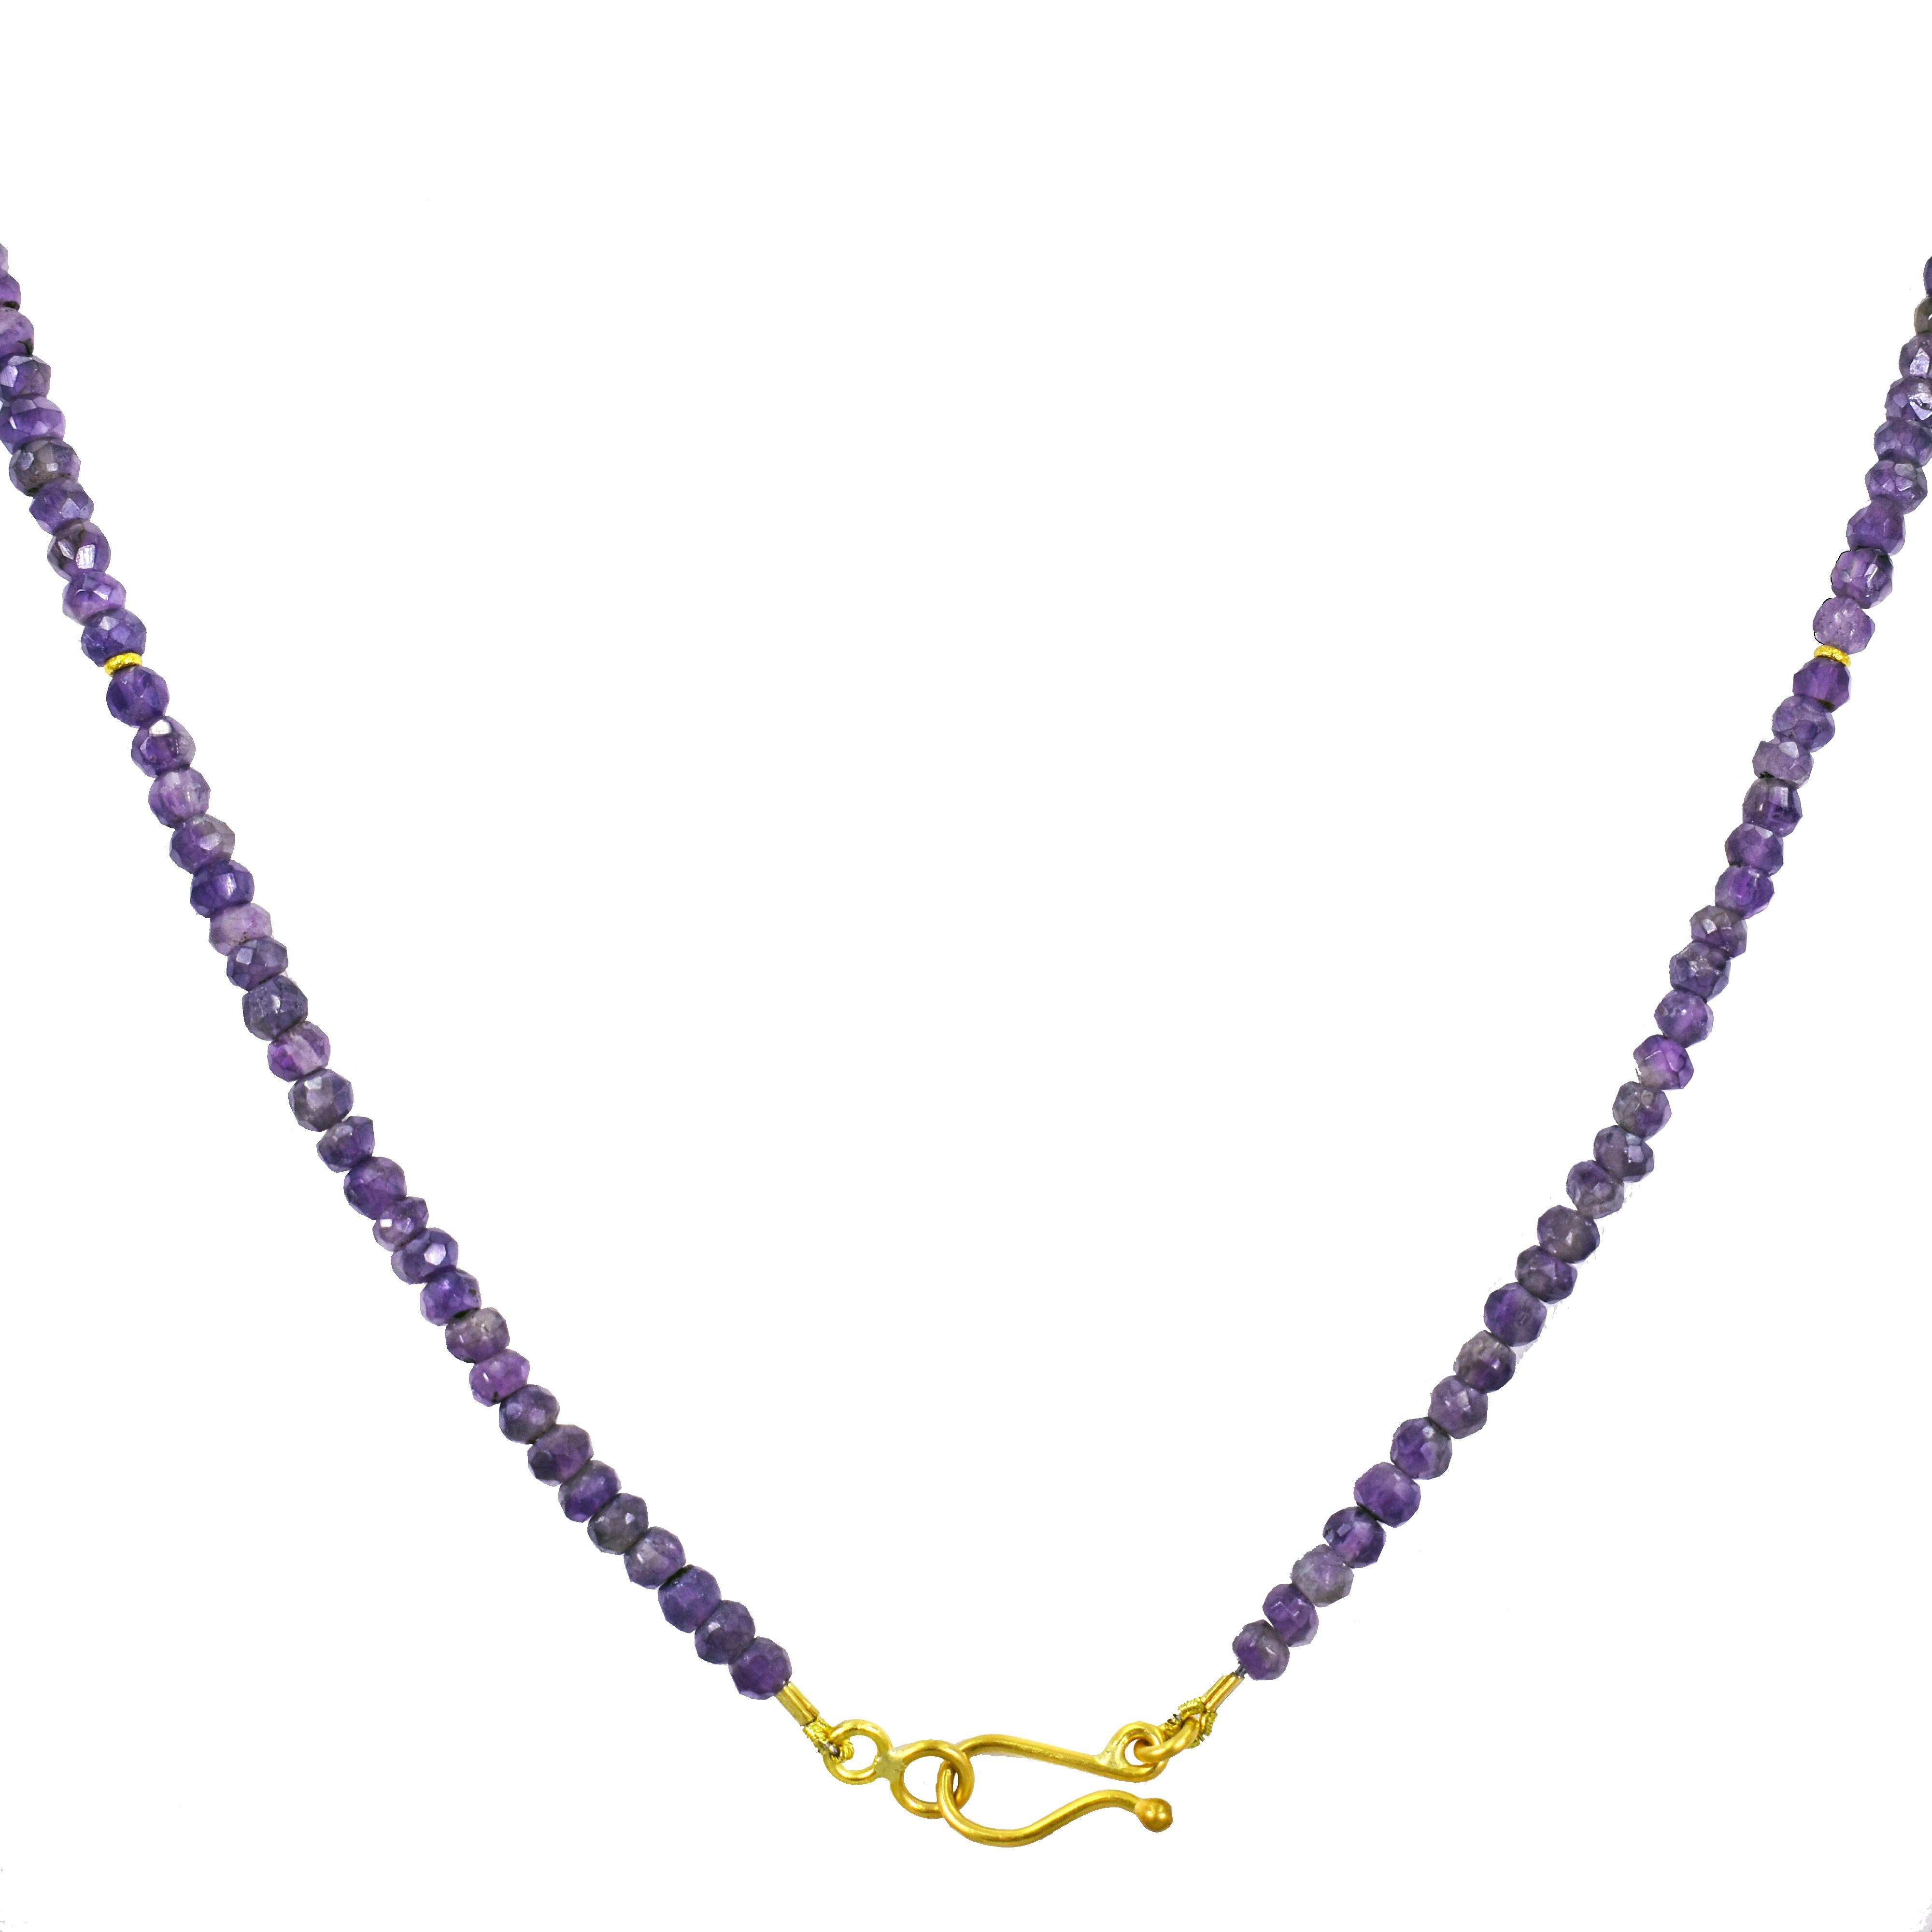 Authentic ancient Roman bronze key, ancient Amethyst bead and 22k yellow gold dangle pendant on faceted Amethyst and 22k gold mini spacer beaded necklace. Beaded necklace is 23.5 inches in length. Dangle pendant is 2.63 inches in total length.